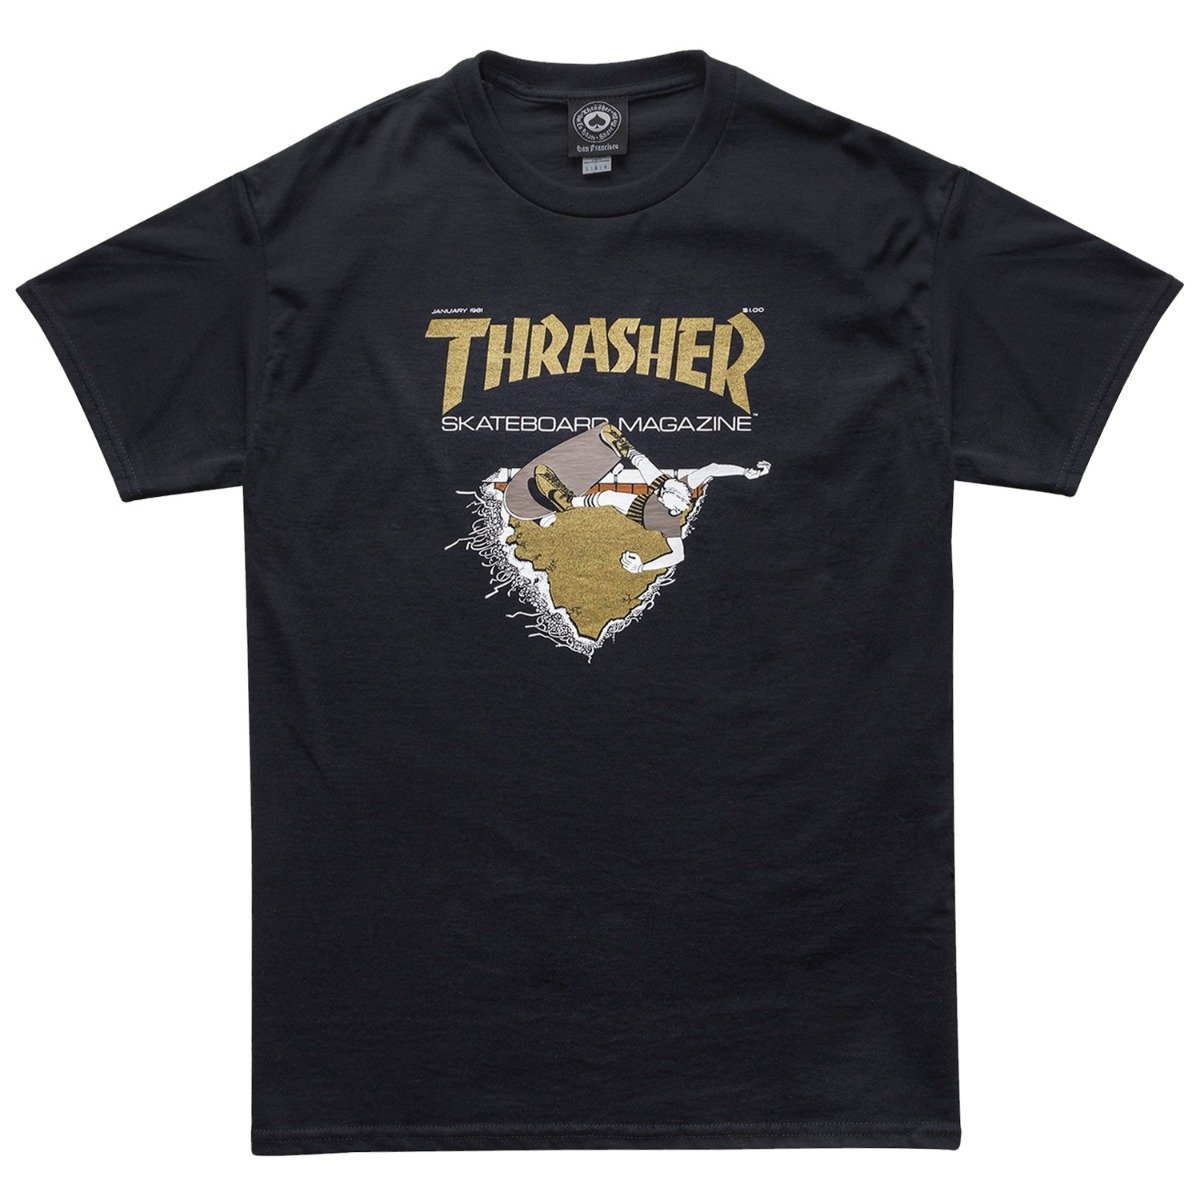 First Cover Tee - Black/Gold